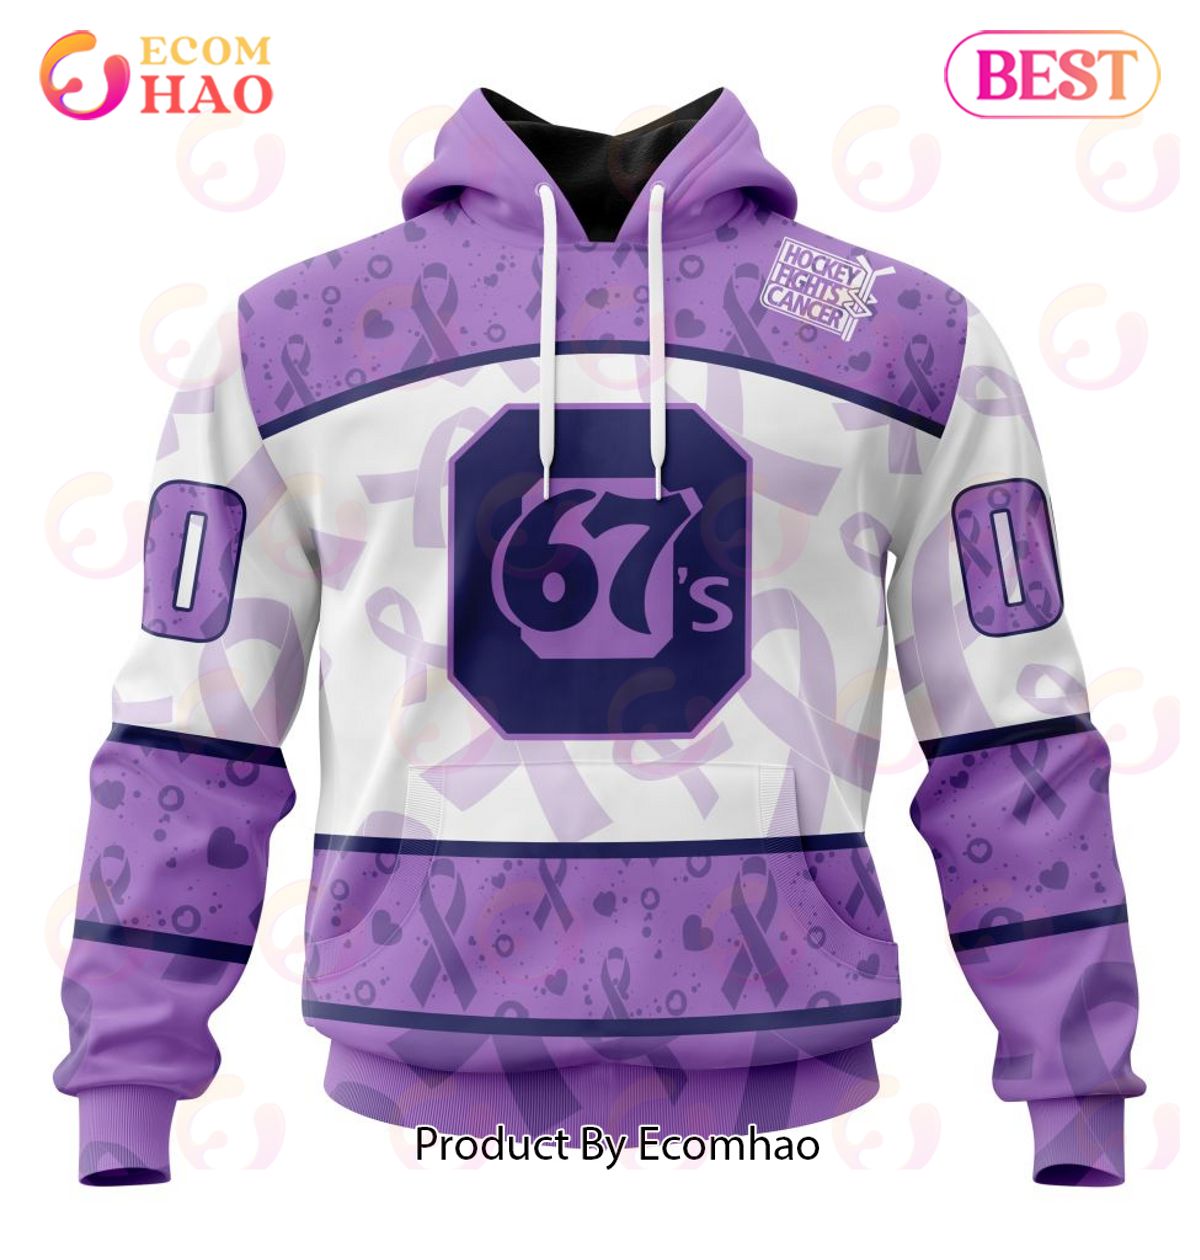 OHL Ottawa 67’s Special Lavender Fight Cancer 3D Hoodie